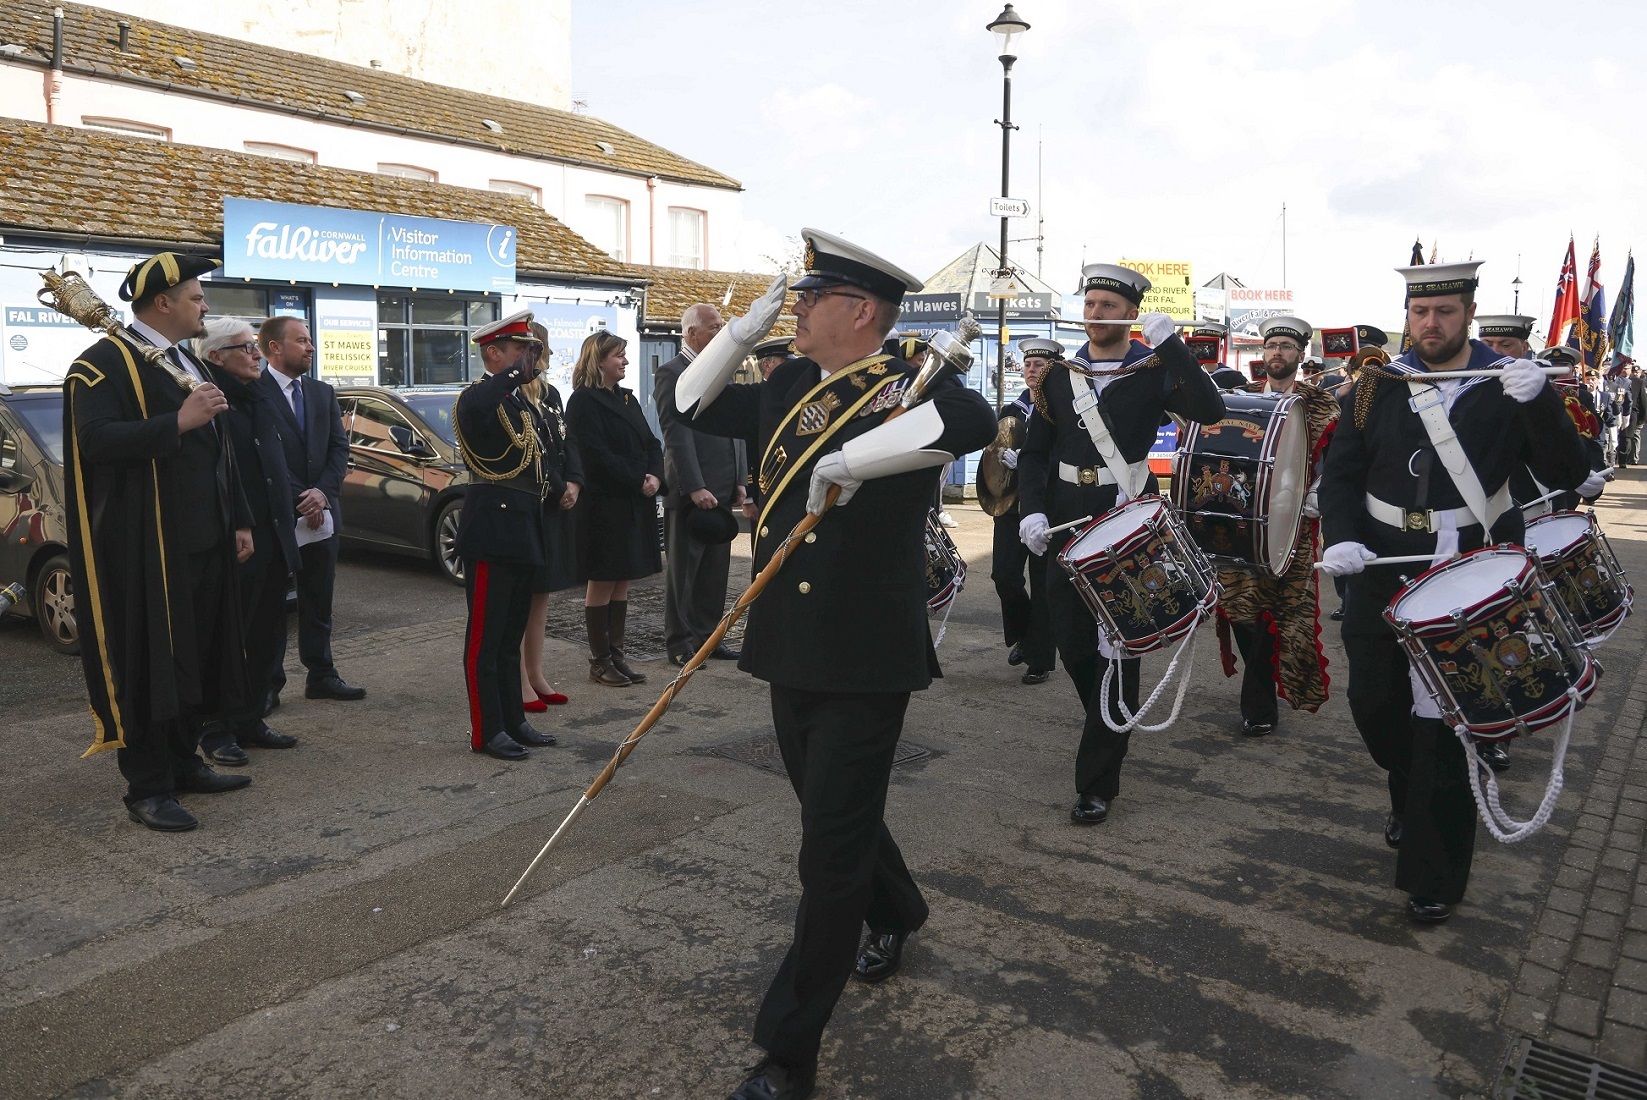 Pictured: HMS Seahawks volunteer band march past VIPs and dignitaries during the 80th memorial service marking the St Nazaire Raid. Credit: LPhot Dan Rosenbaum, RNAS Yeovilton